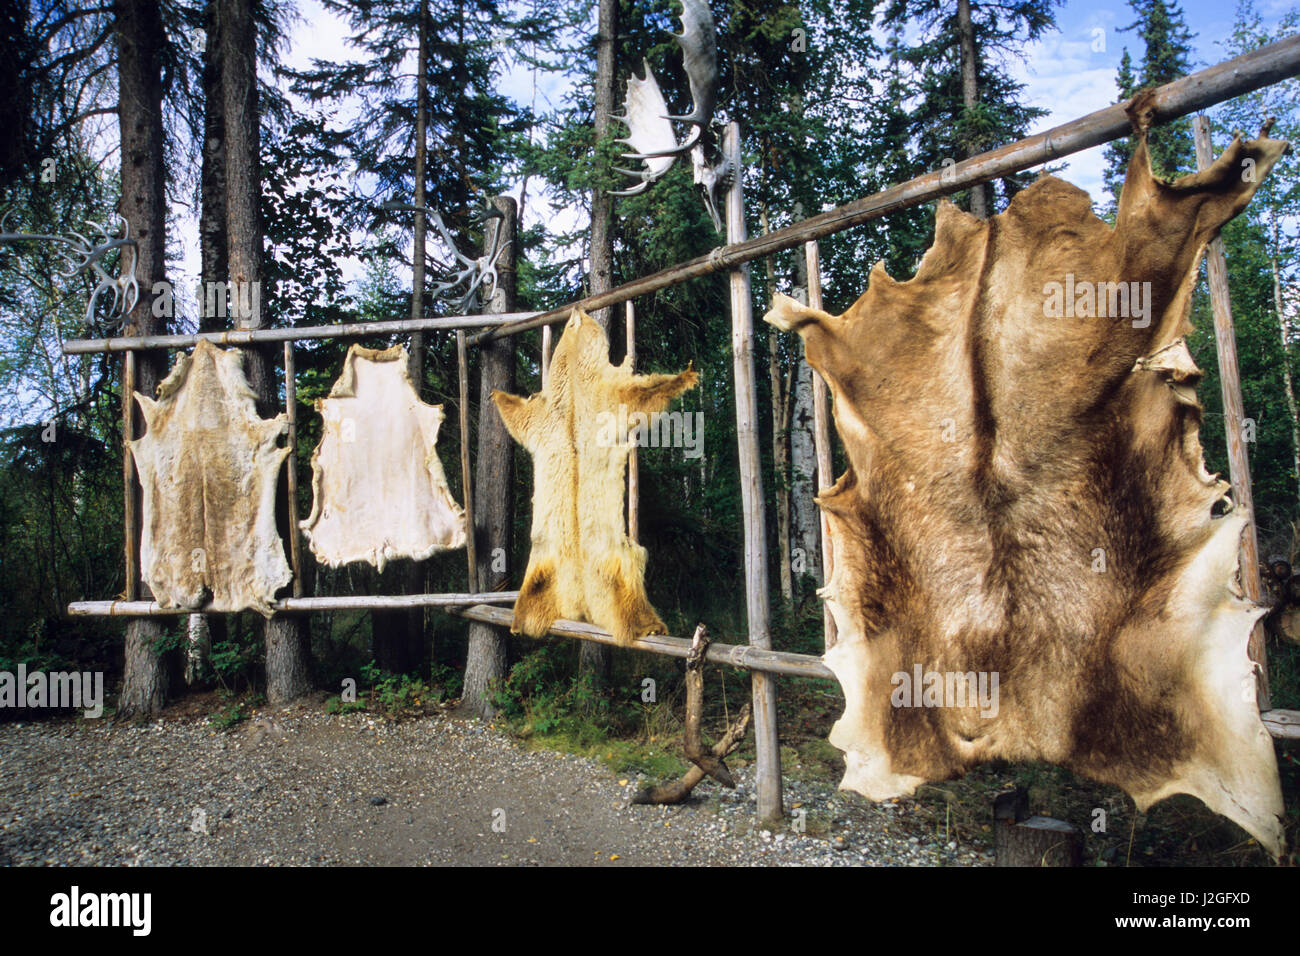 Caribou, deer, bear and elk hides are stretched over wooden racks for easy  scraping and tanning of large animal skins. Alaska (PR Stock Photo - Alamy